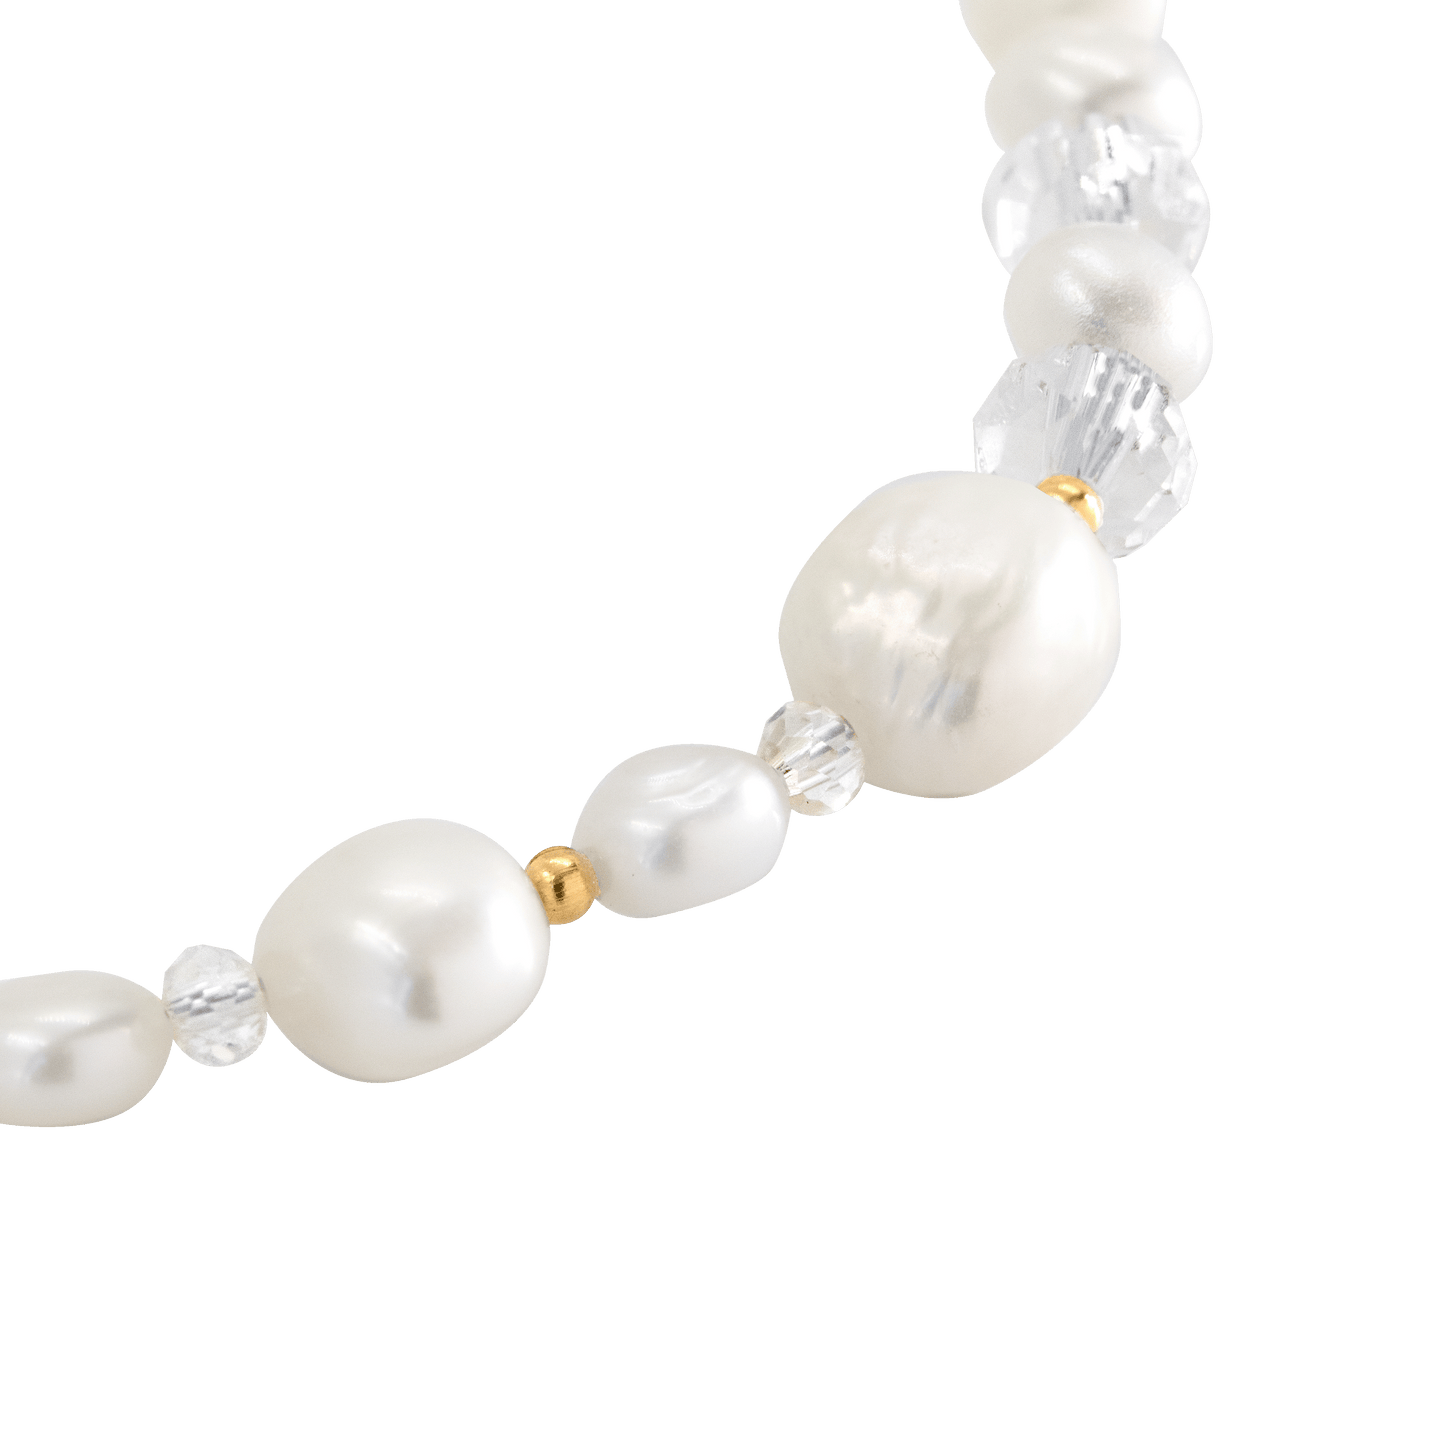 Icy Cool Pearl Necklace Gold